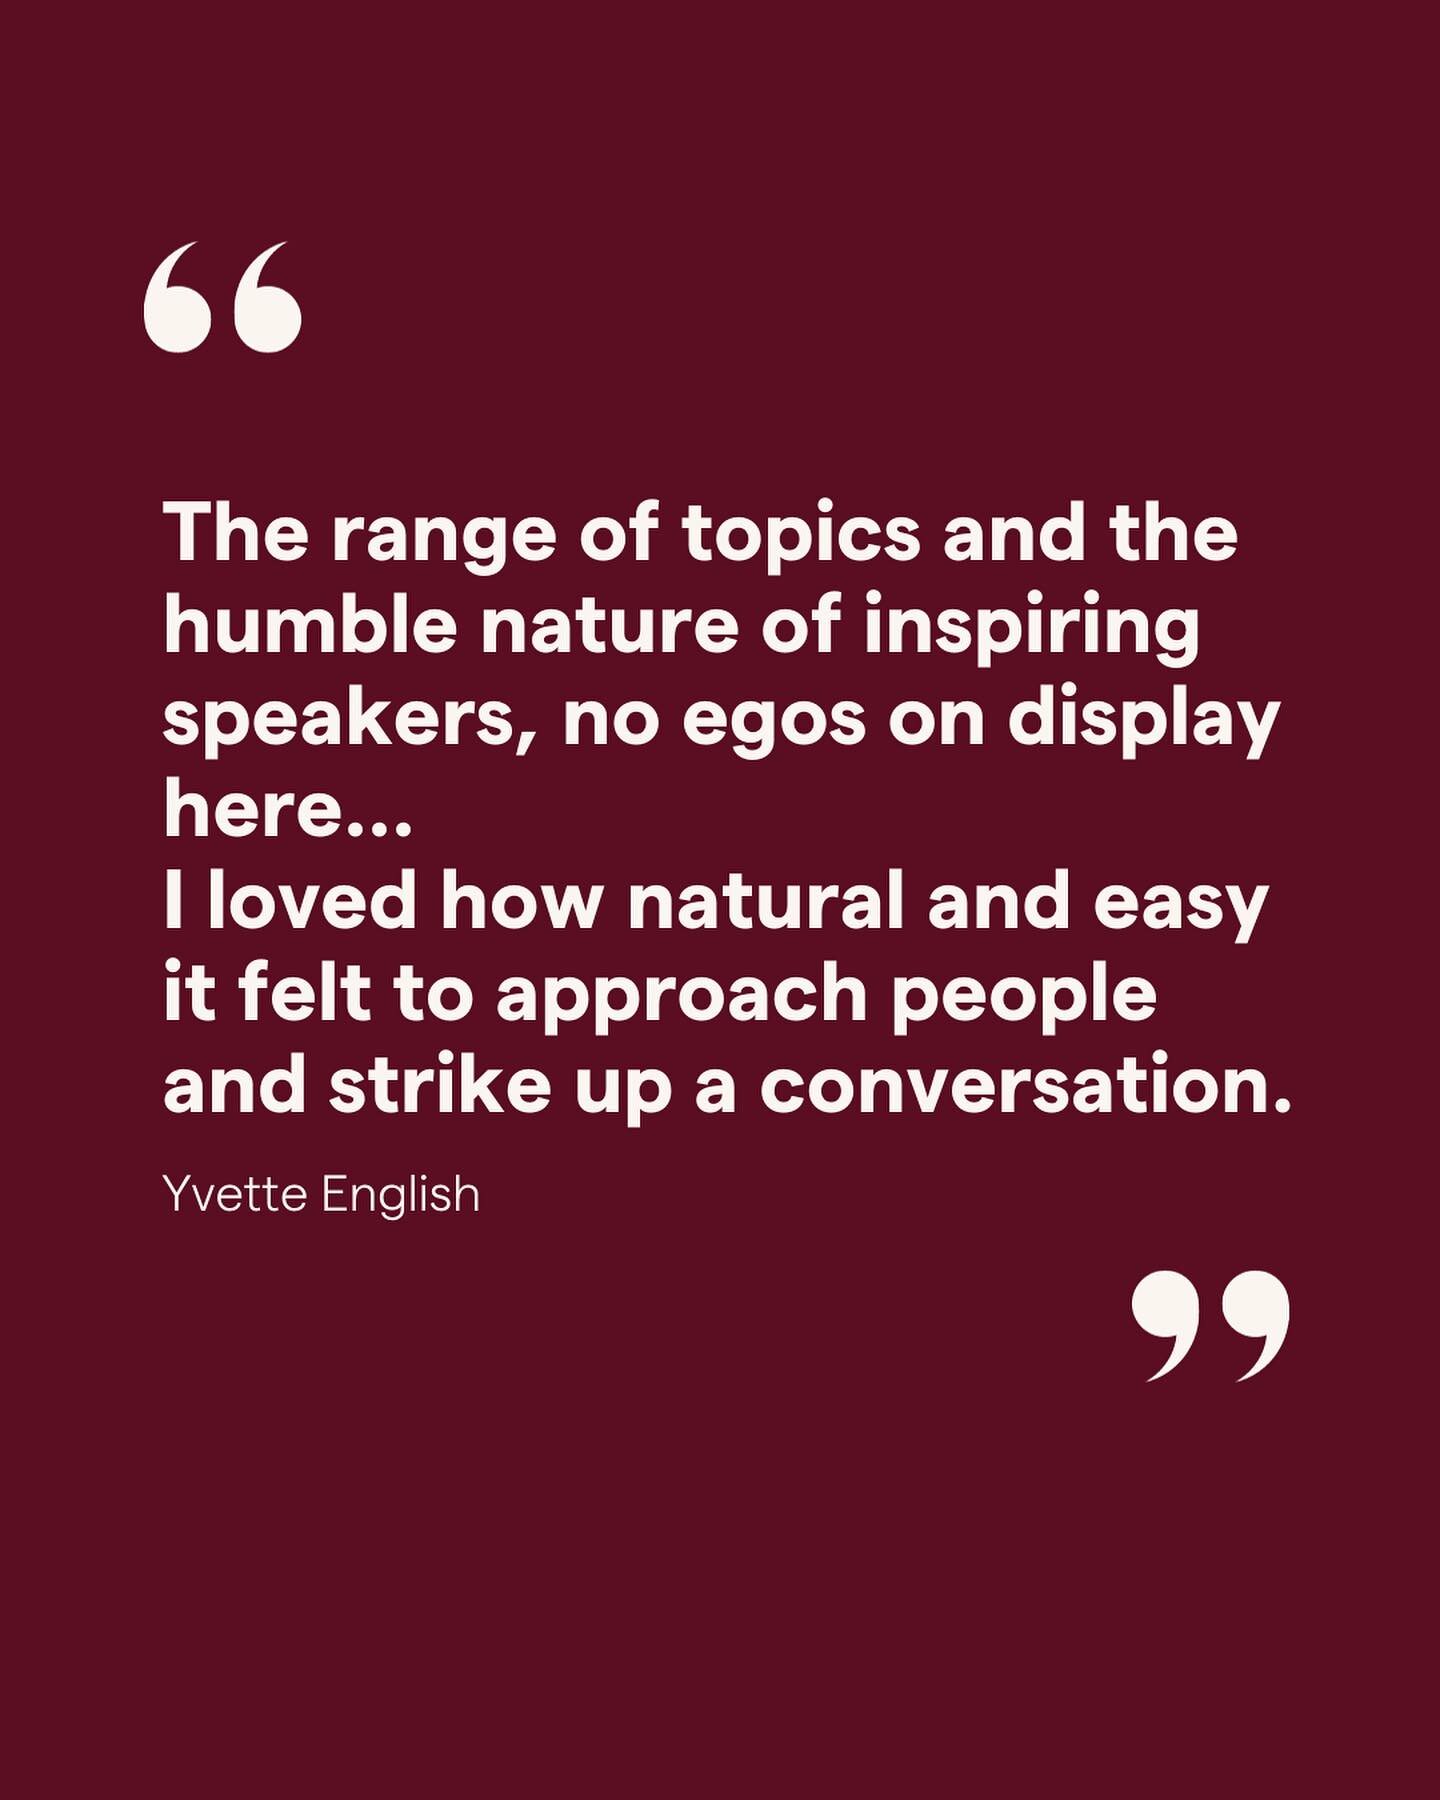 Thanks&nbsp;Yvette English&nbsp;for sharing your feedback about your experience at Purpose 2023. &quot;The range of topics and humble nature of inspiring speakers, no egos on display here... I loved how natural and easy it felt to approach people and